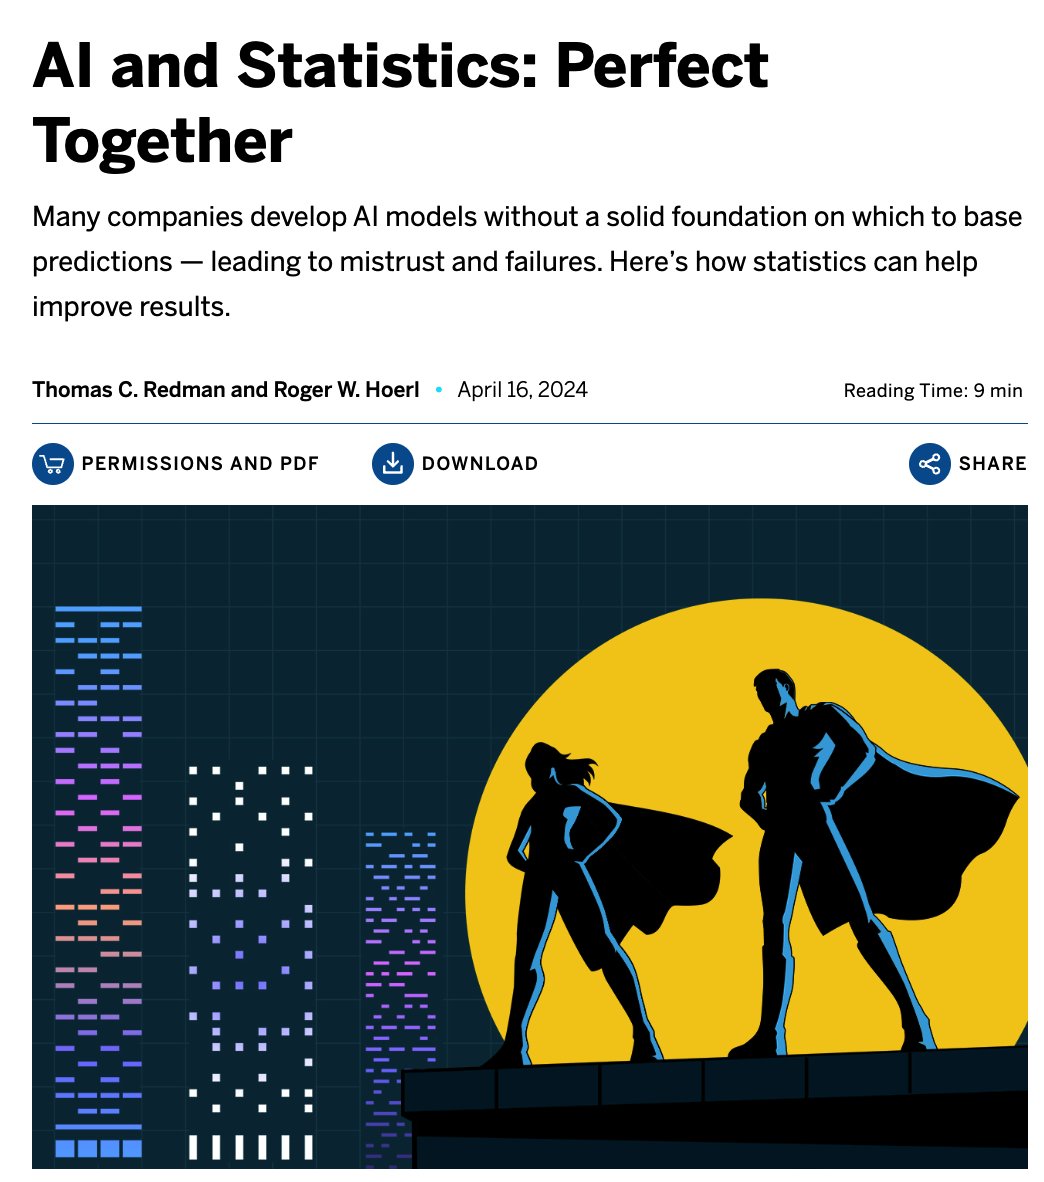 AI and Statistics: Perfect Together ow.ly/axM350Rkwk4 by @thedatadoc1 @rogerhoerl #DataScience #FutureOfWork #PeopleAnalytics